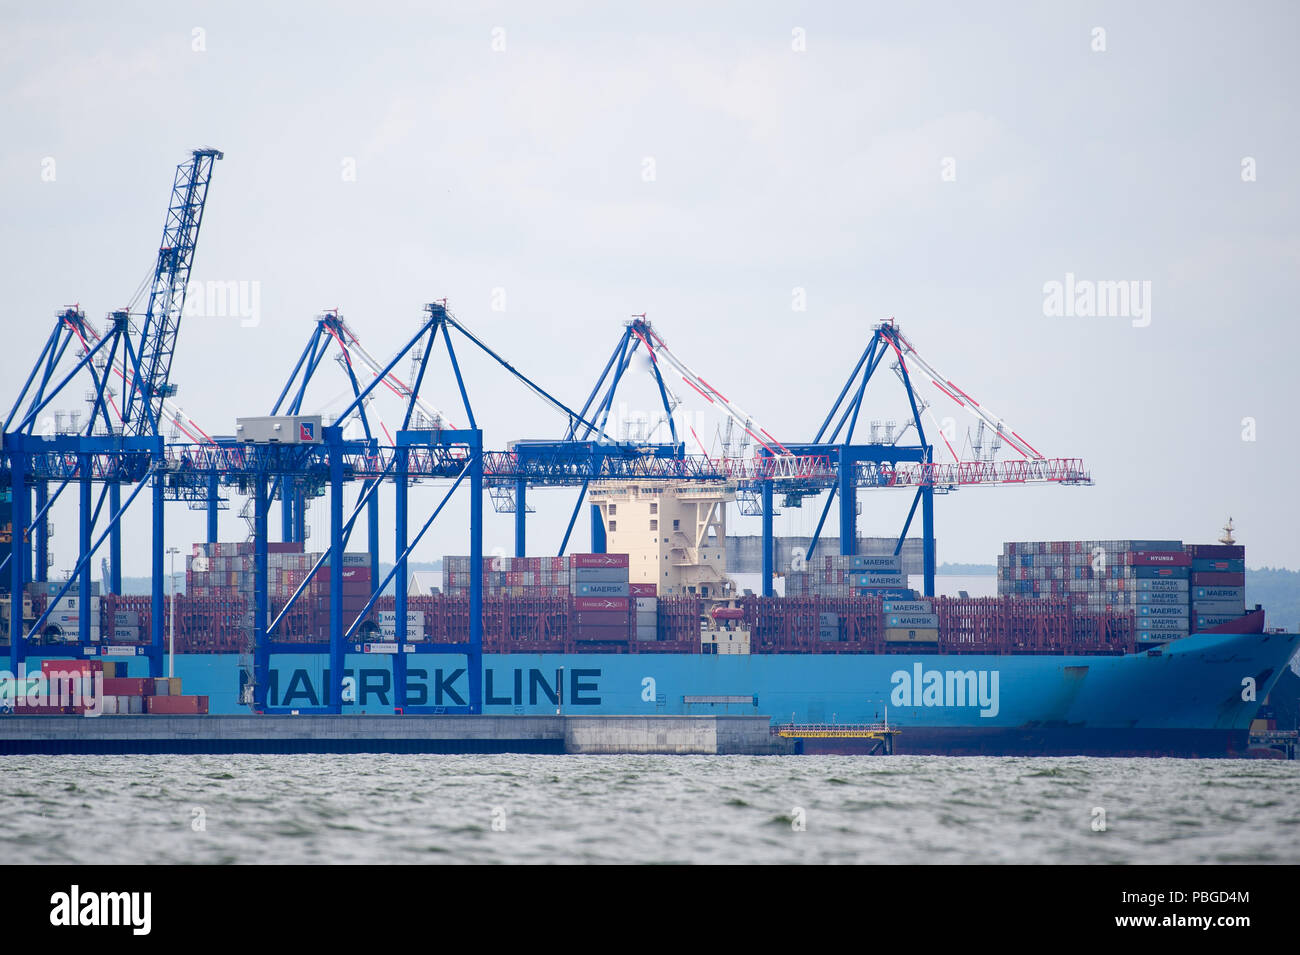 Magleby Maersk container ship in Deepwater Container Terminal DCT in Gdansk, Poland. July 22nd 2018 © Wojciech Strozyk / Alamy Stock Photo Stock Photo